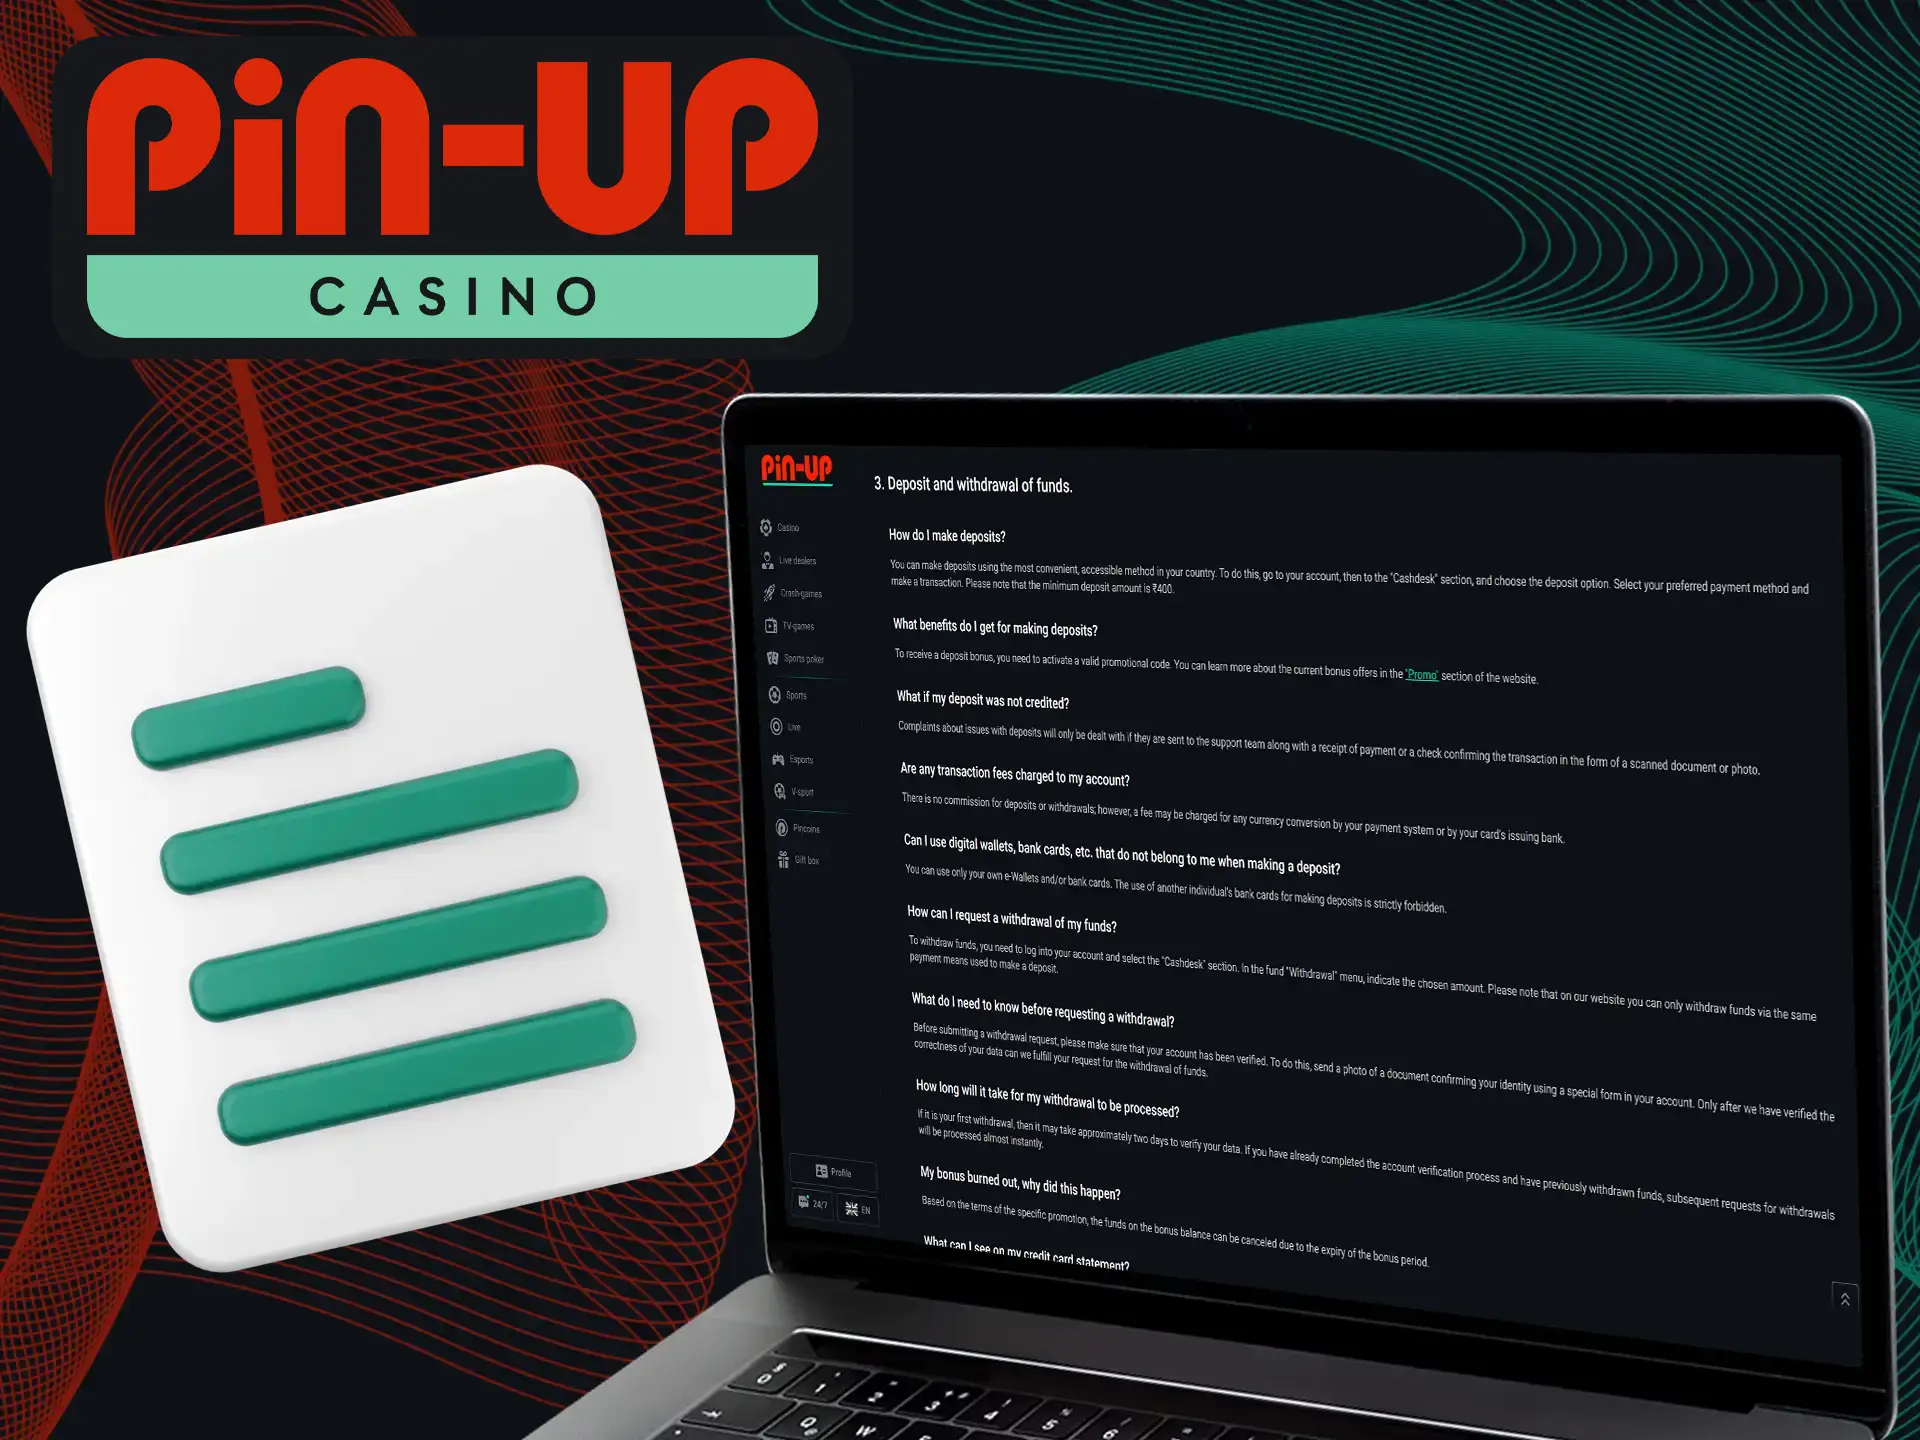 Learn more about Pin-Up Casino withdrawal policies.